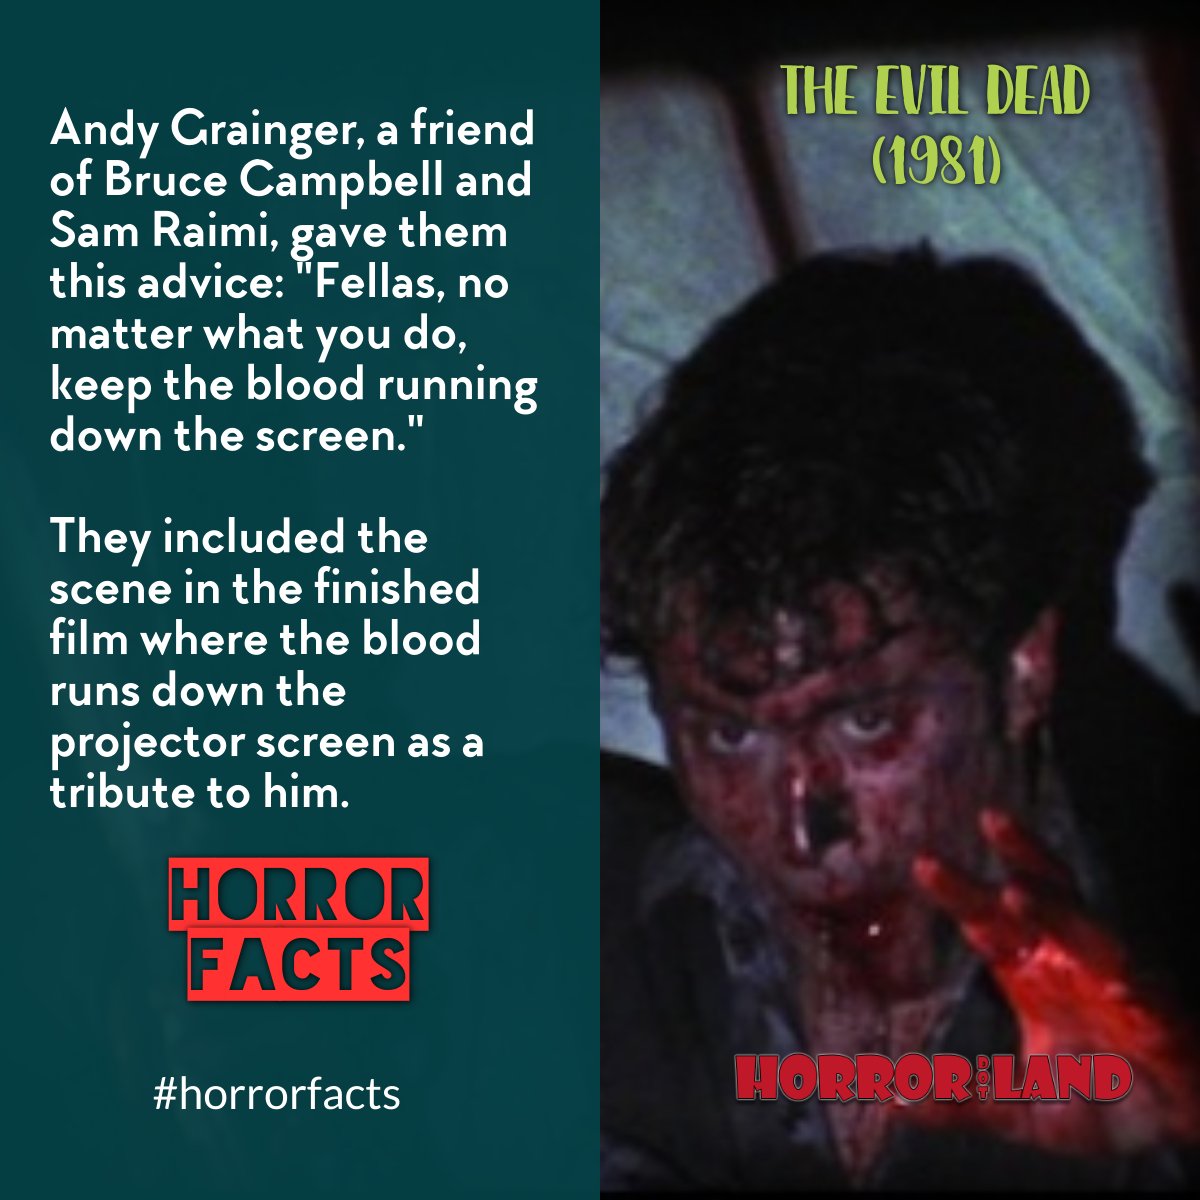 The Evil Dead (1981) - Horror Facts #horrorfacts